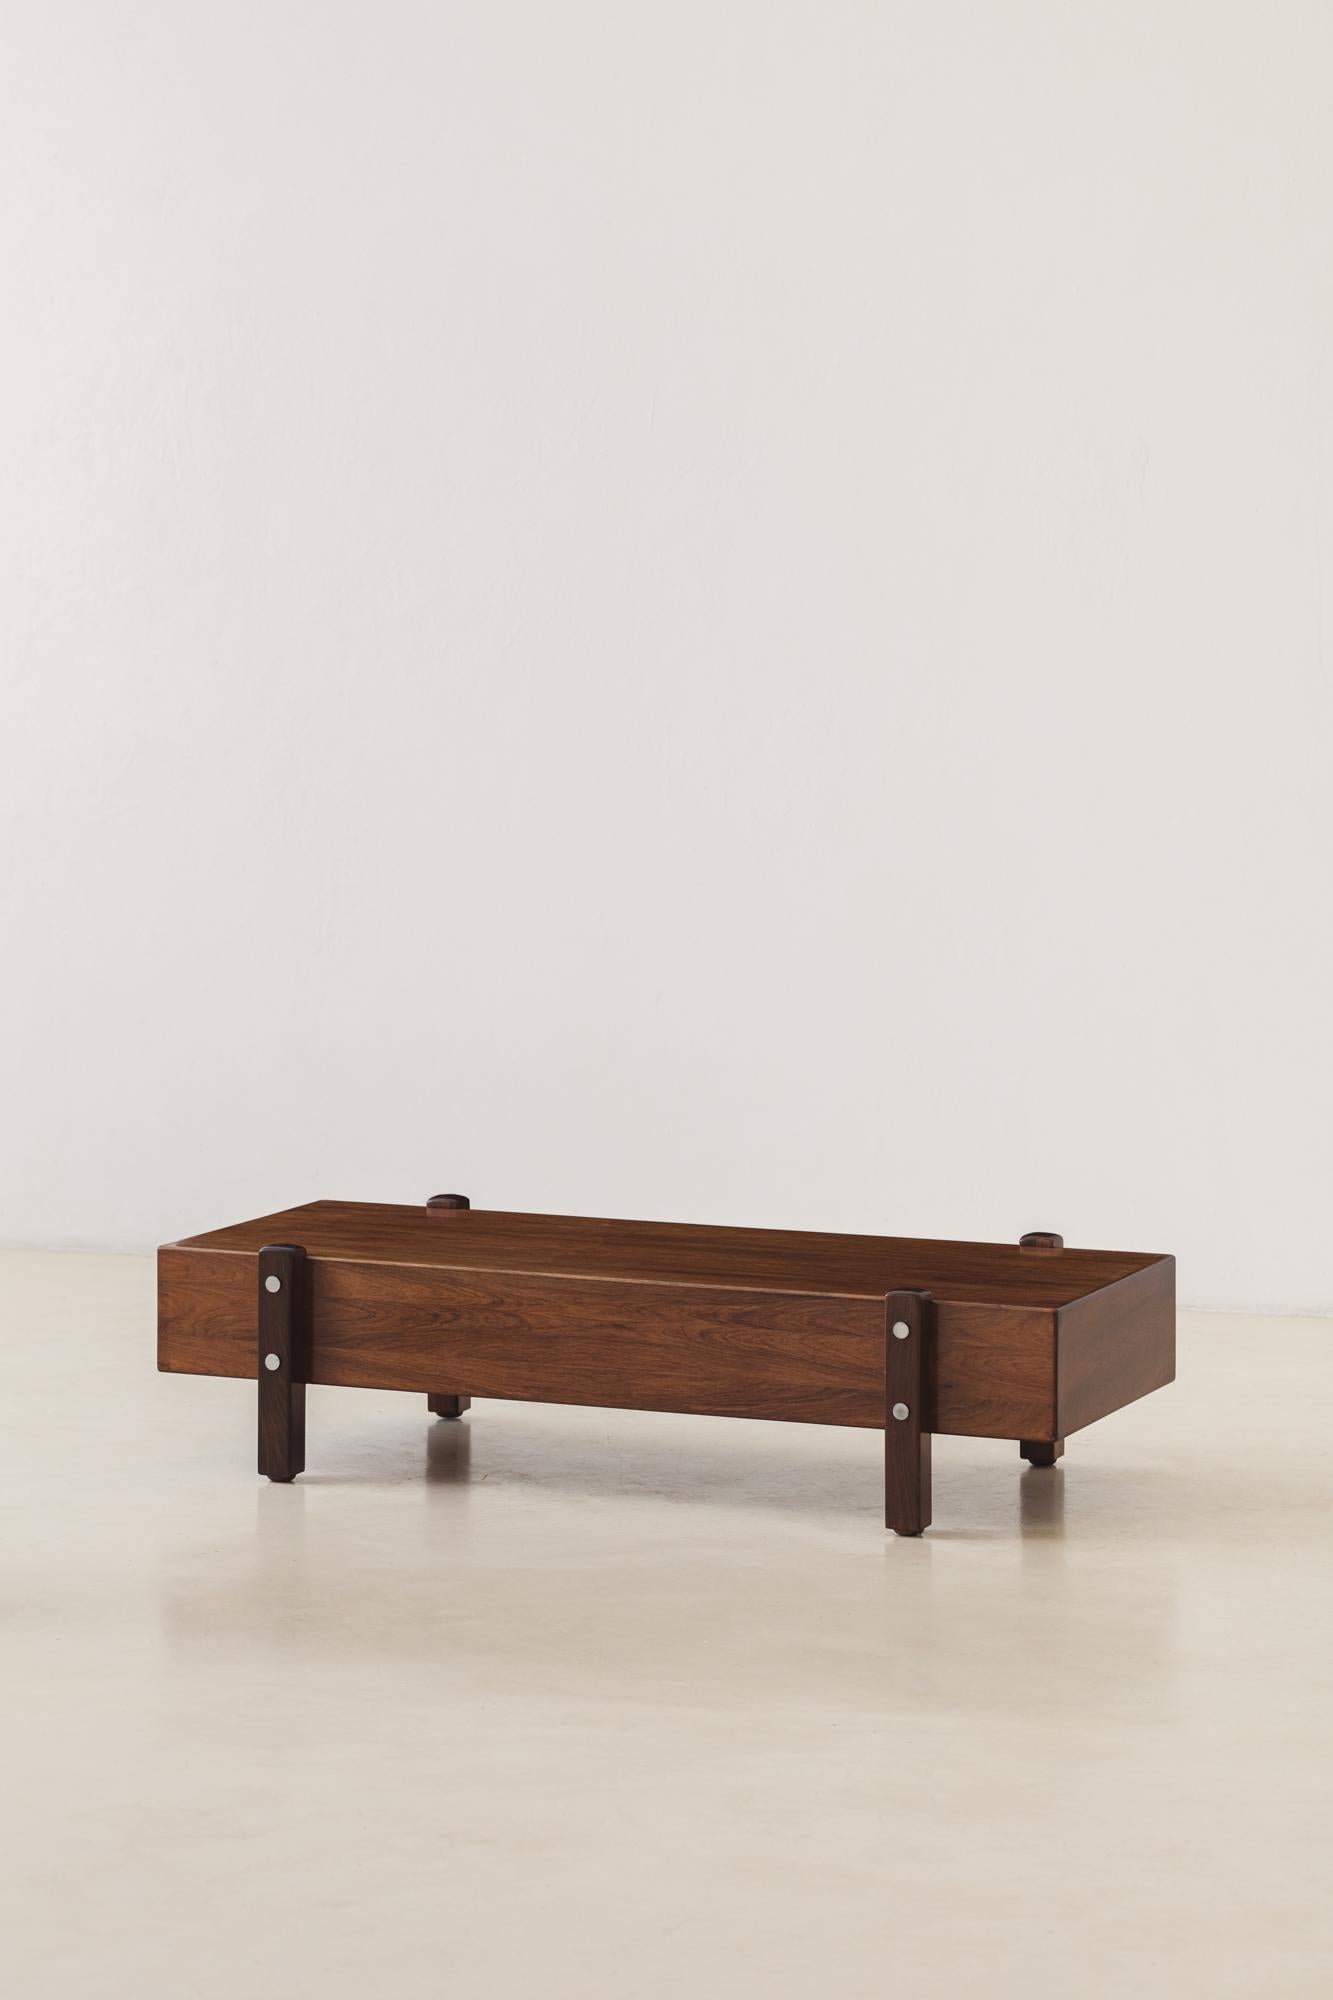 Vintage Eleh Bench by Sergio Rodrigues, Rosewood, 1960s, Brazilian Midcentury For Sale 2